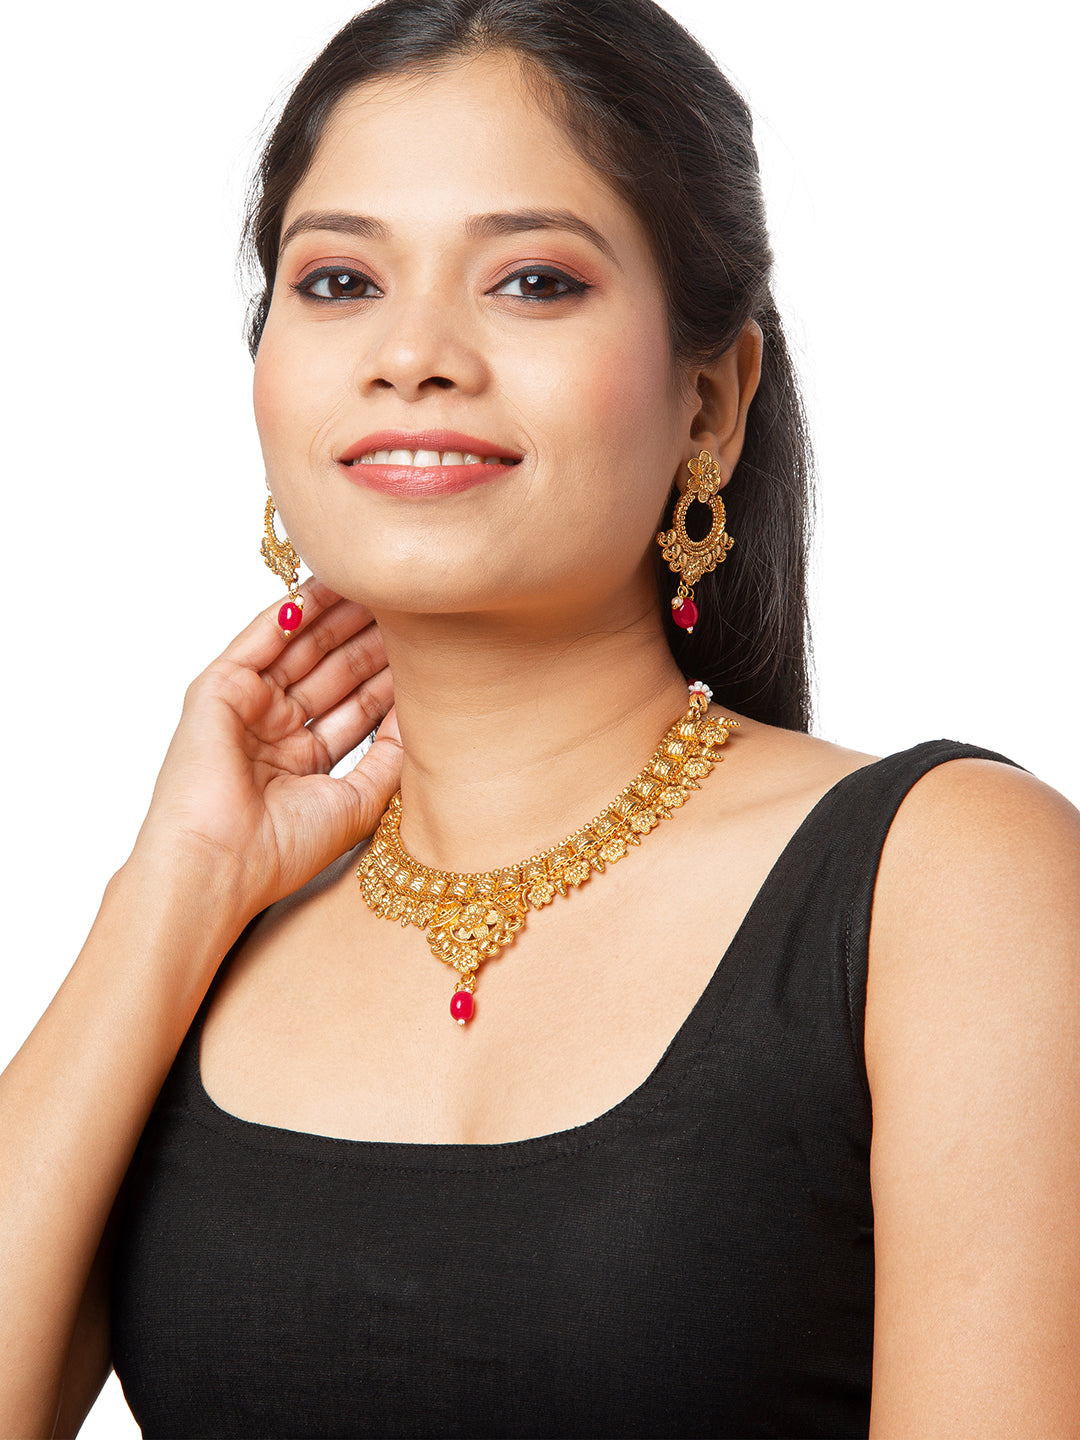 Shining Jewel Handcrafted Antique Gold Plated Jewellery Necklace set With Matching Earring For Women (SJN_88)